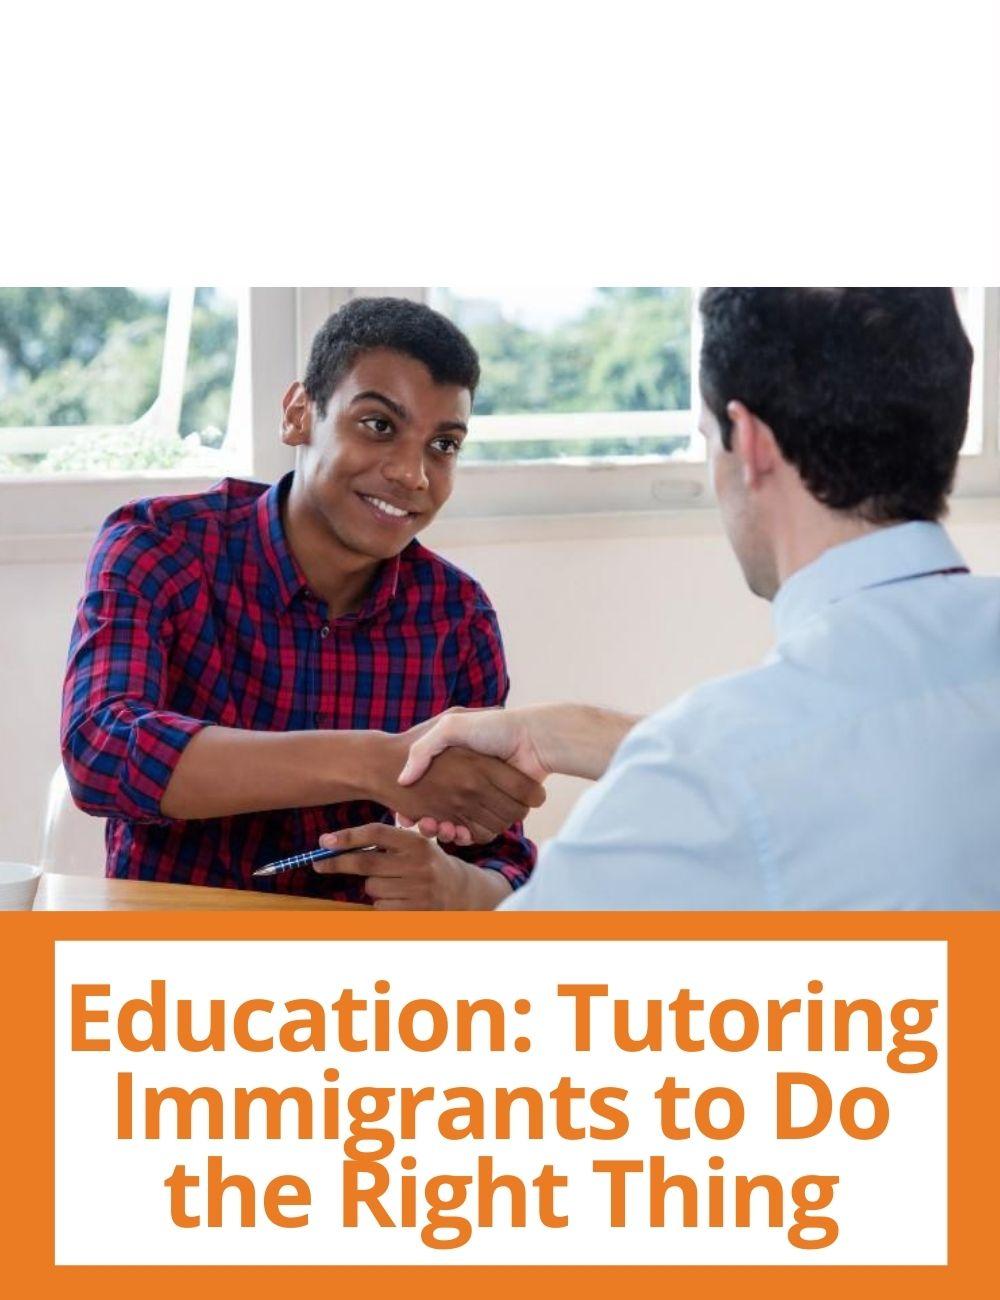 Link to related stories. Image: a student and a tutor are shaking hands. Story headline: Education: Tutoring Immigrants to Do the Right Thing